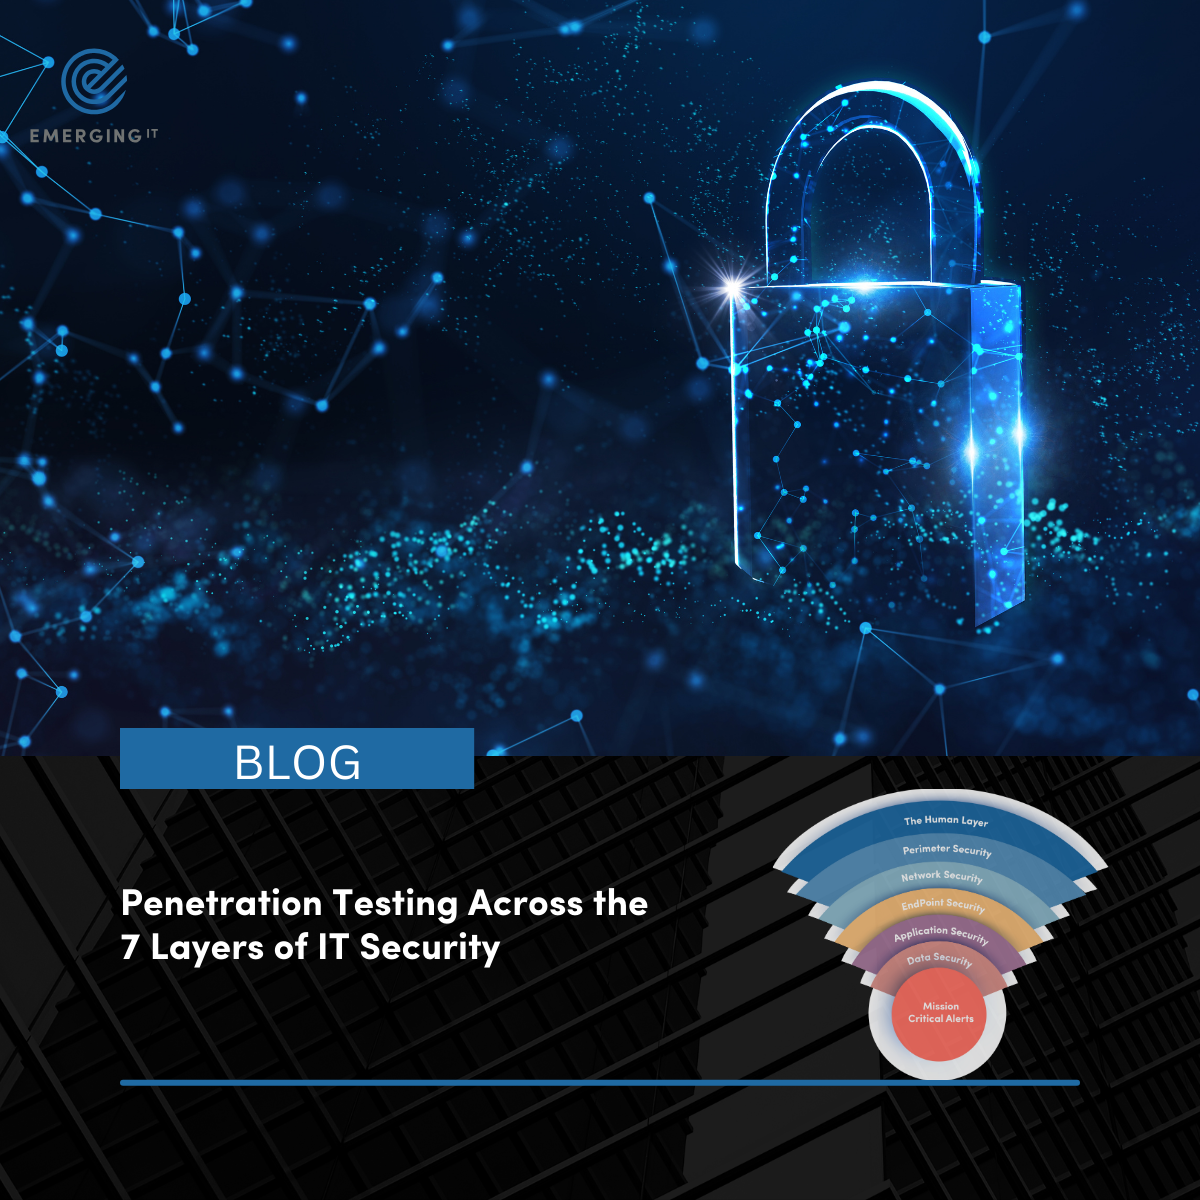 Penetration Testing Across the 7 Layers of IT Security